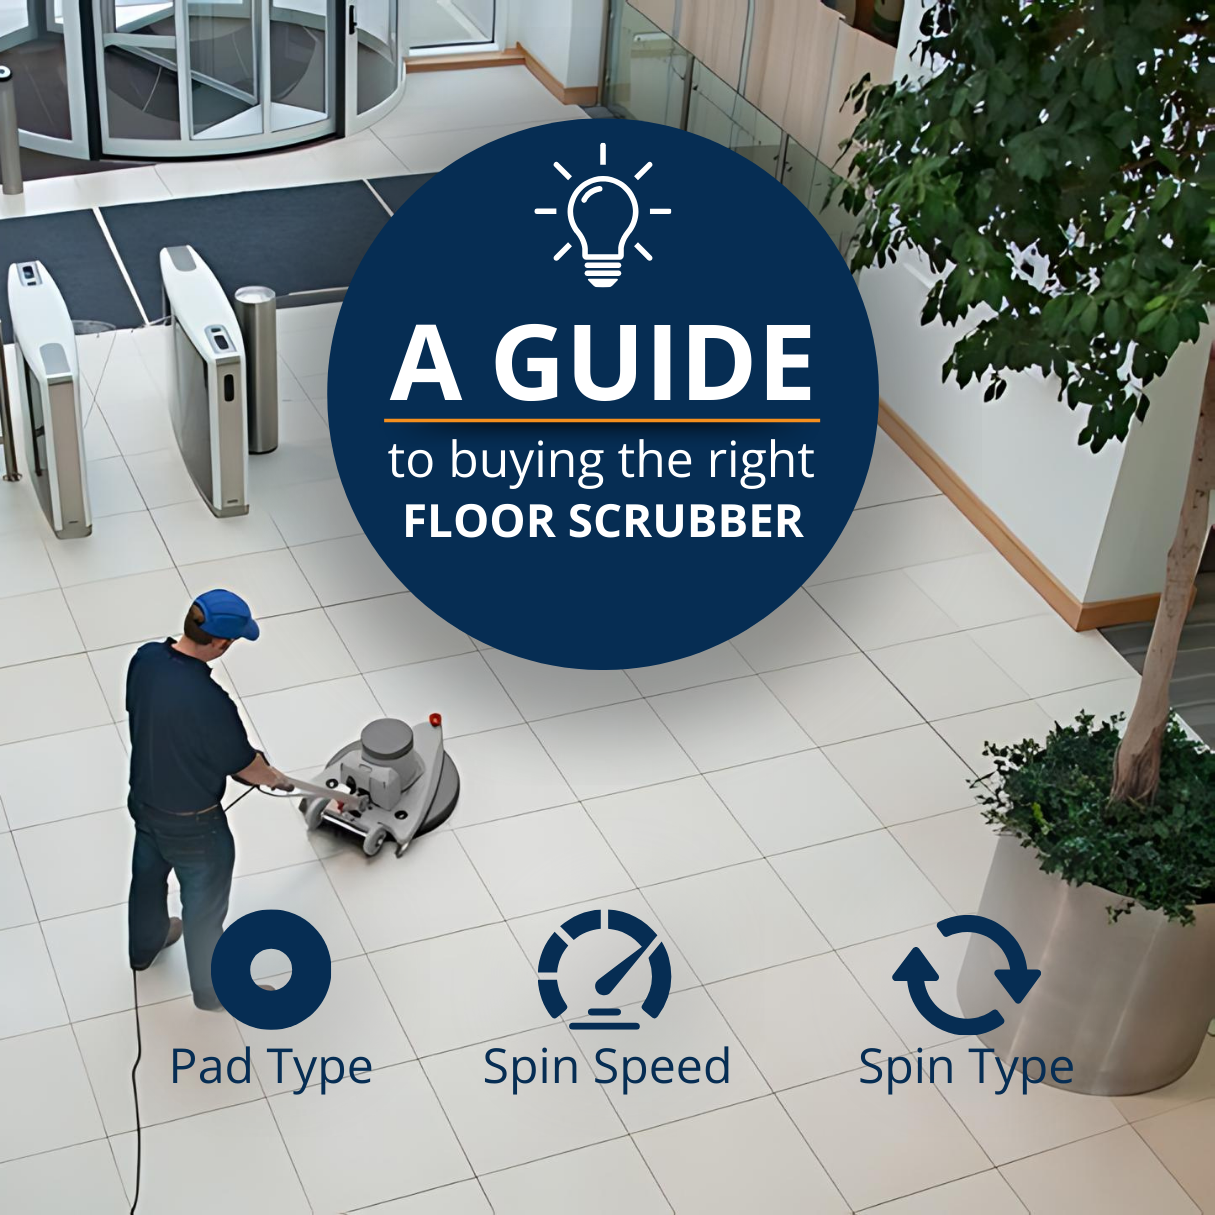 A Guide to Buying the Right Floor Scrubber